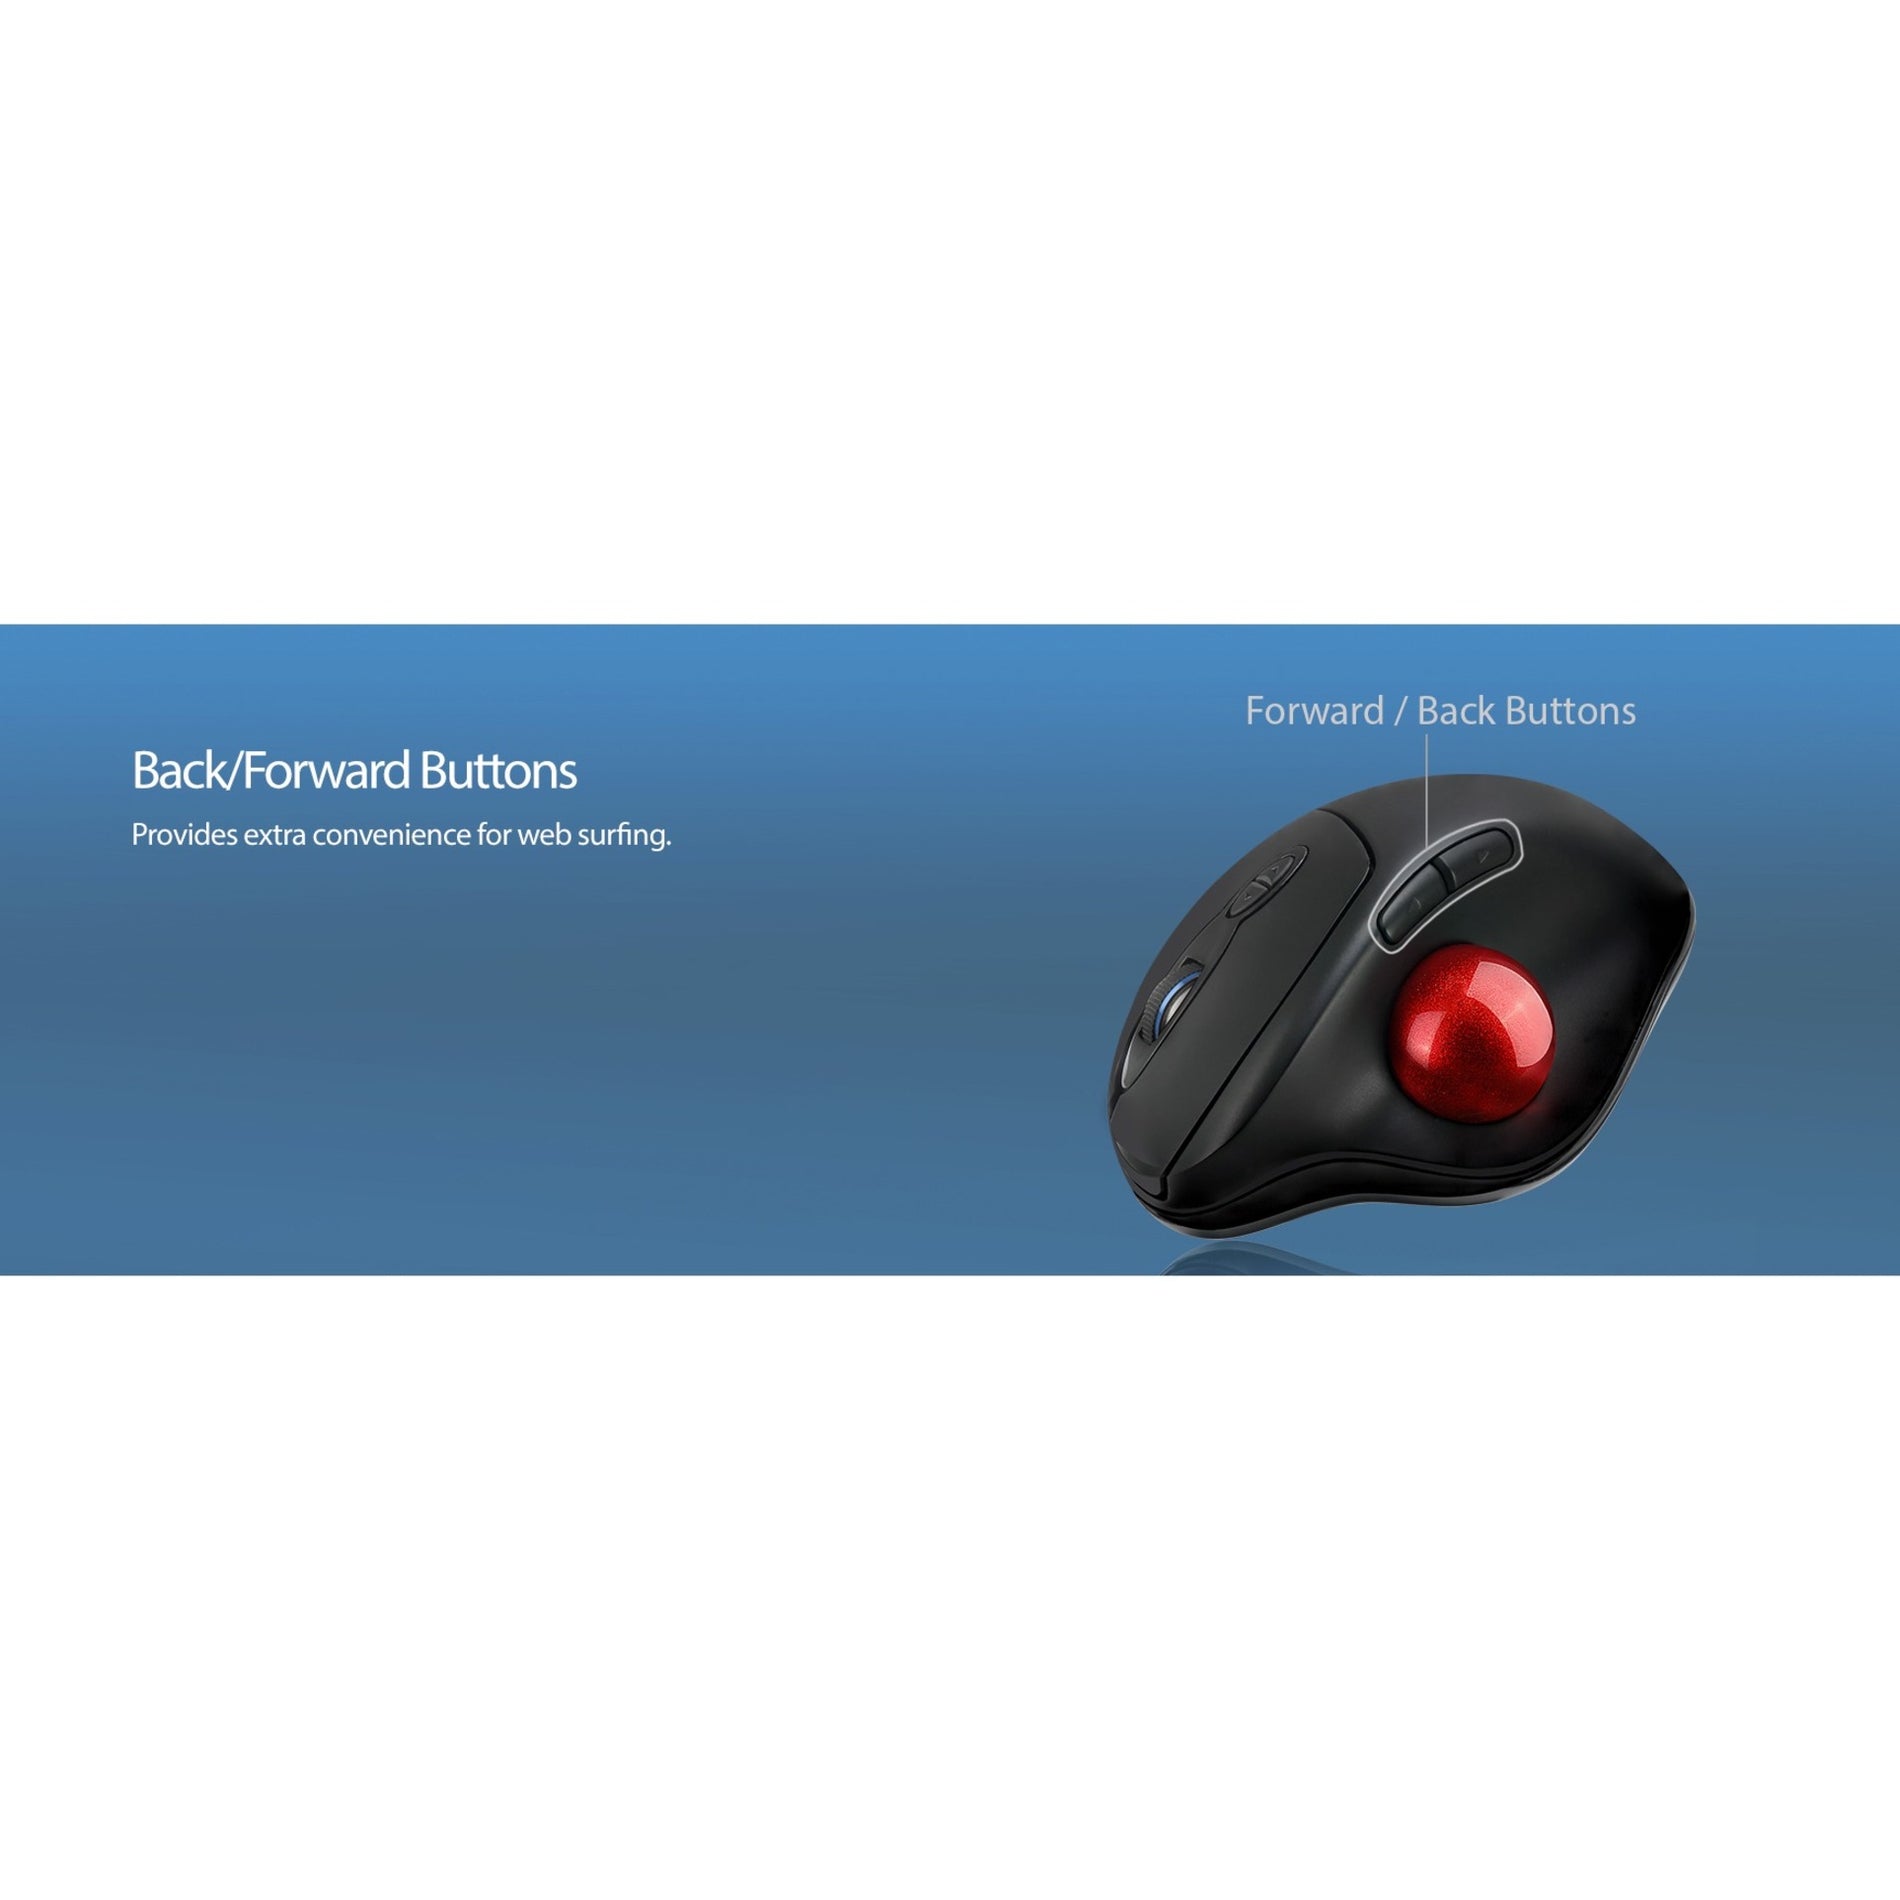 Adesso IMOUSE T30 Wireless Programmable Ergonomic Trackball Mouse, 7 Buttons, 4800 DPI